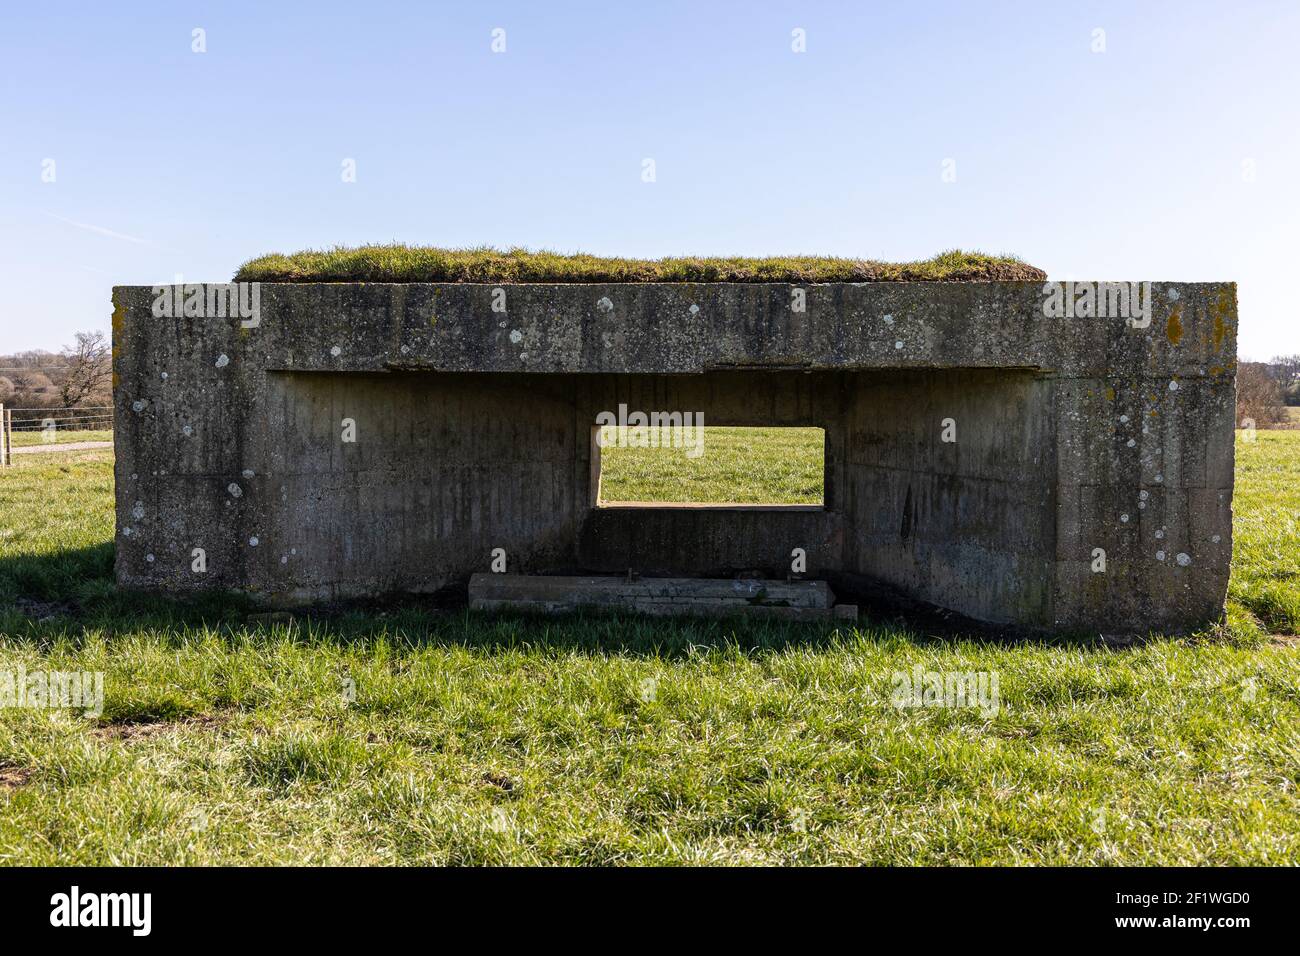 Pillbox bunker World War II anti tank bunker,  these bunkers were used for the defense of the United Kingdom against a possible enemy invasion. Stock Photo